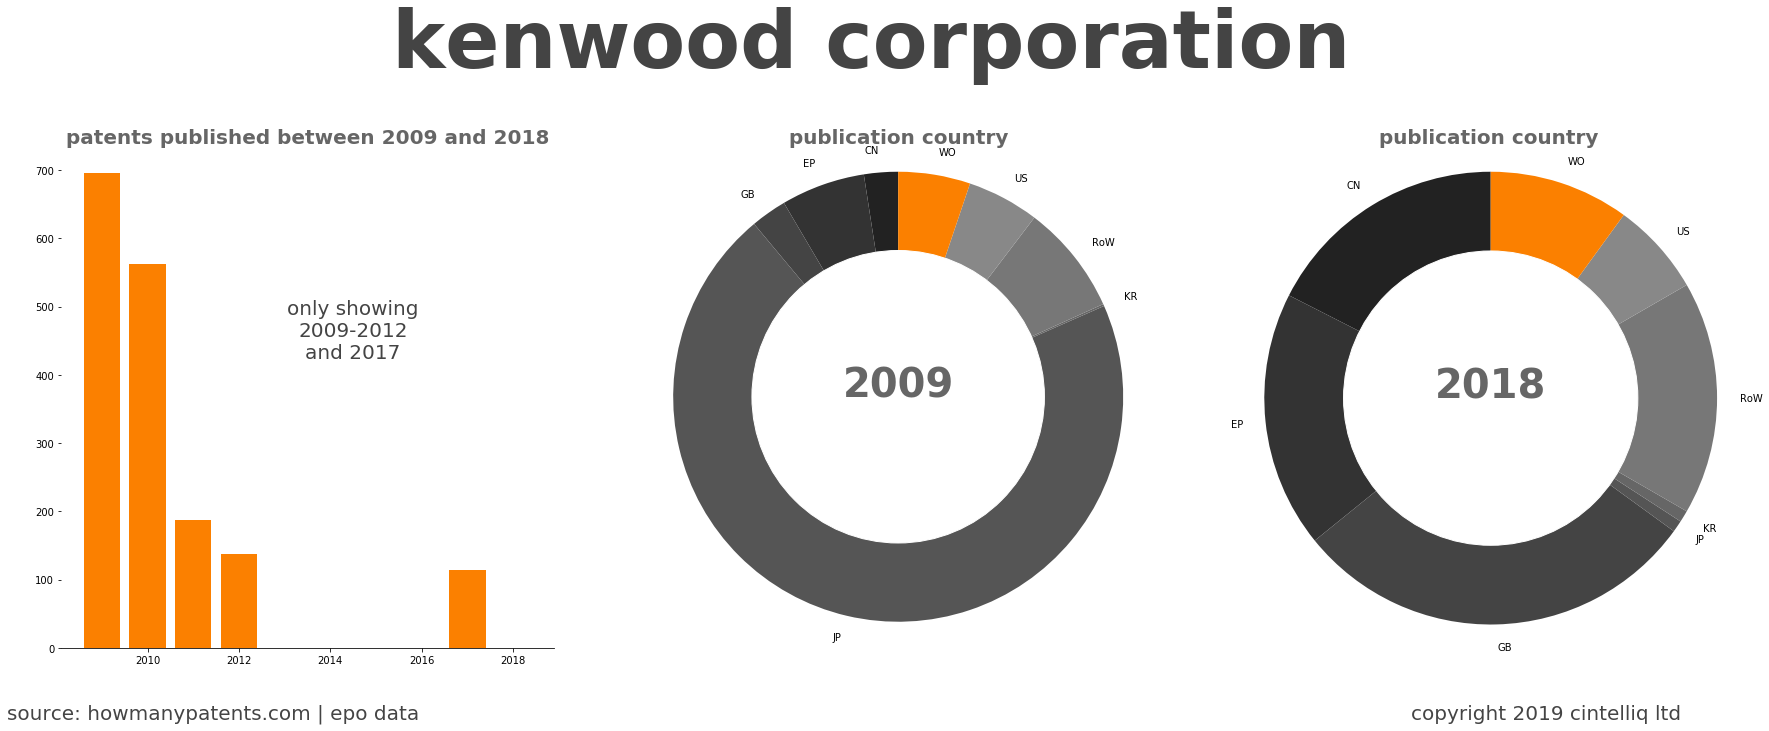 summary of patents for Kenwood Corporation